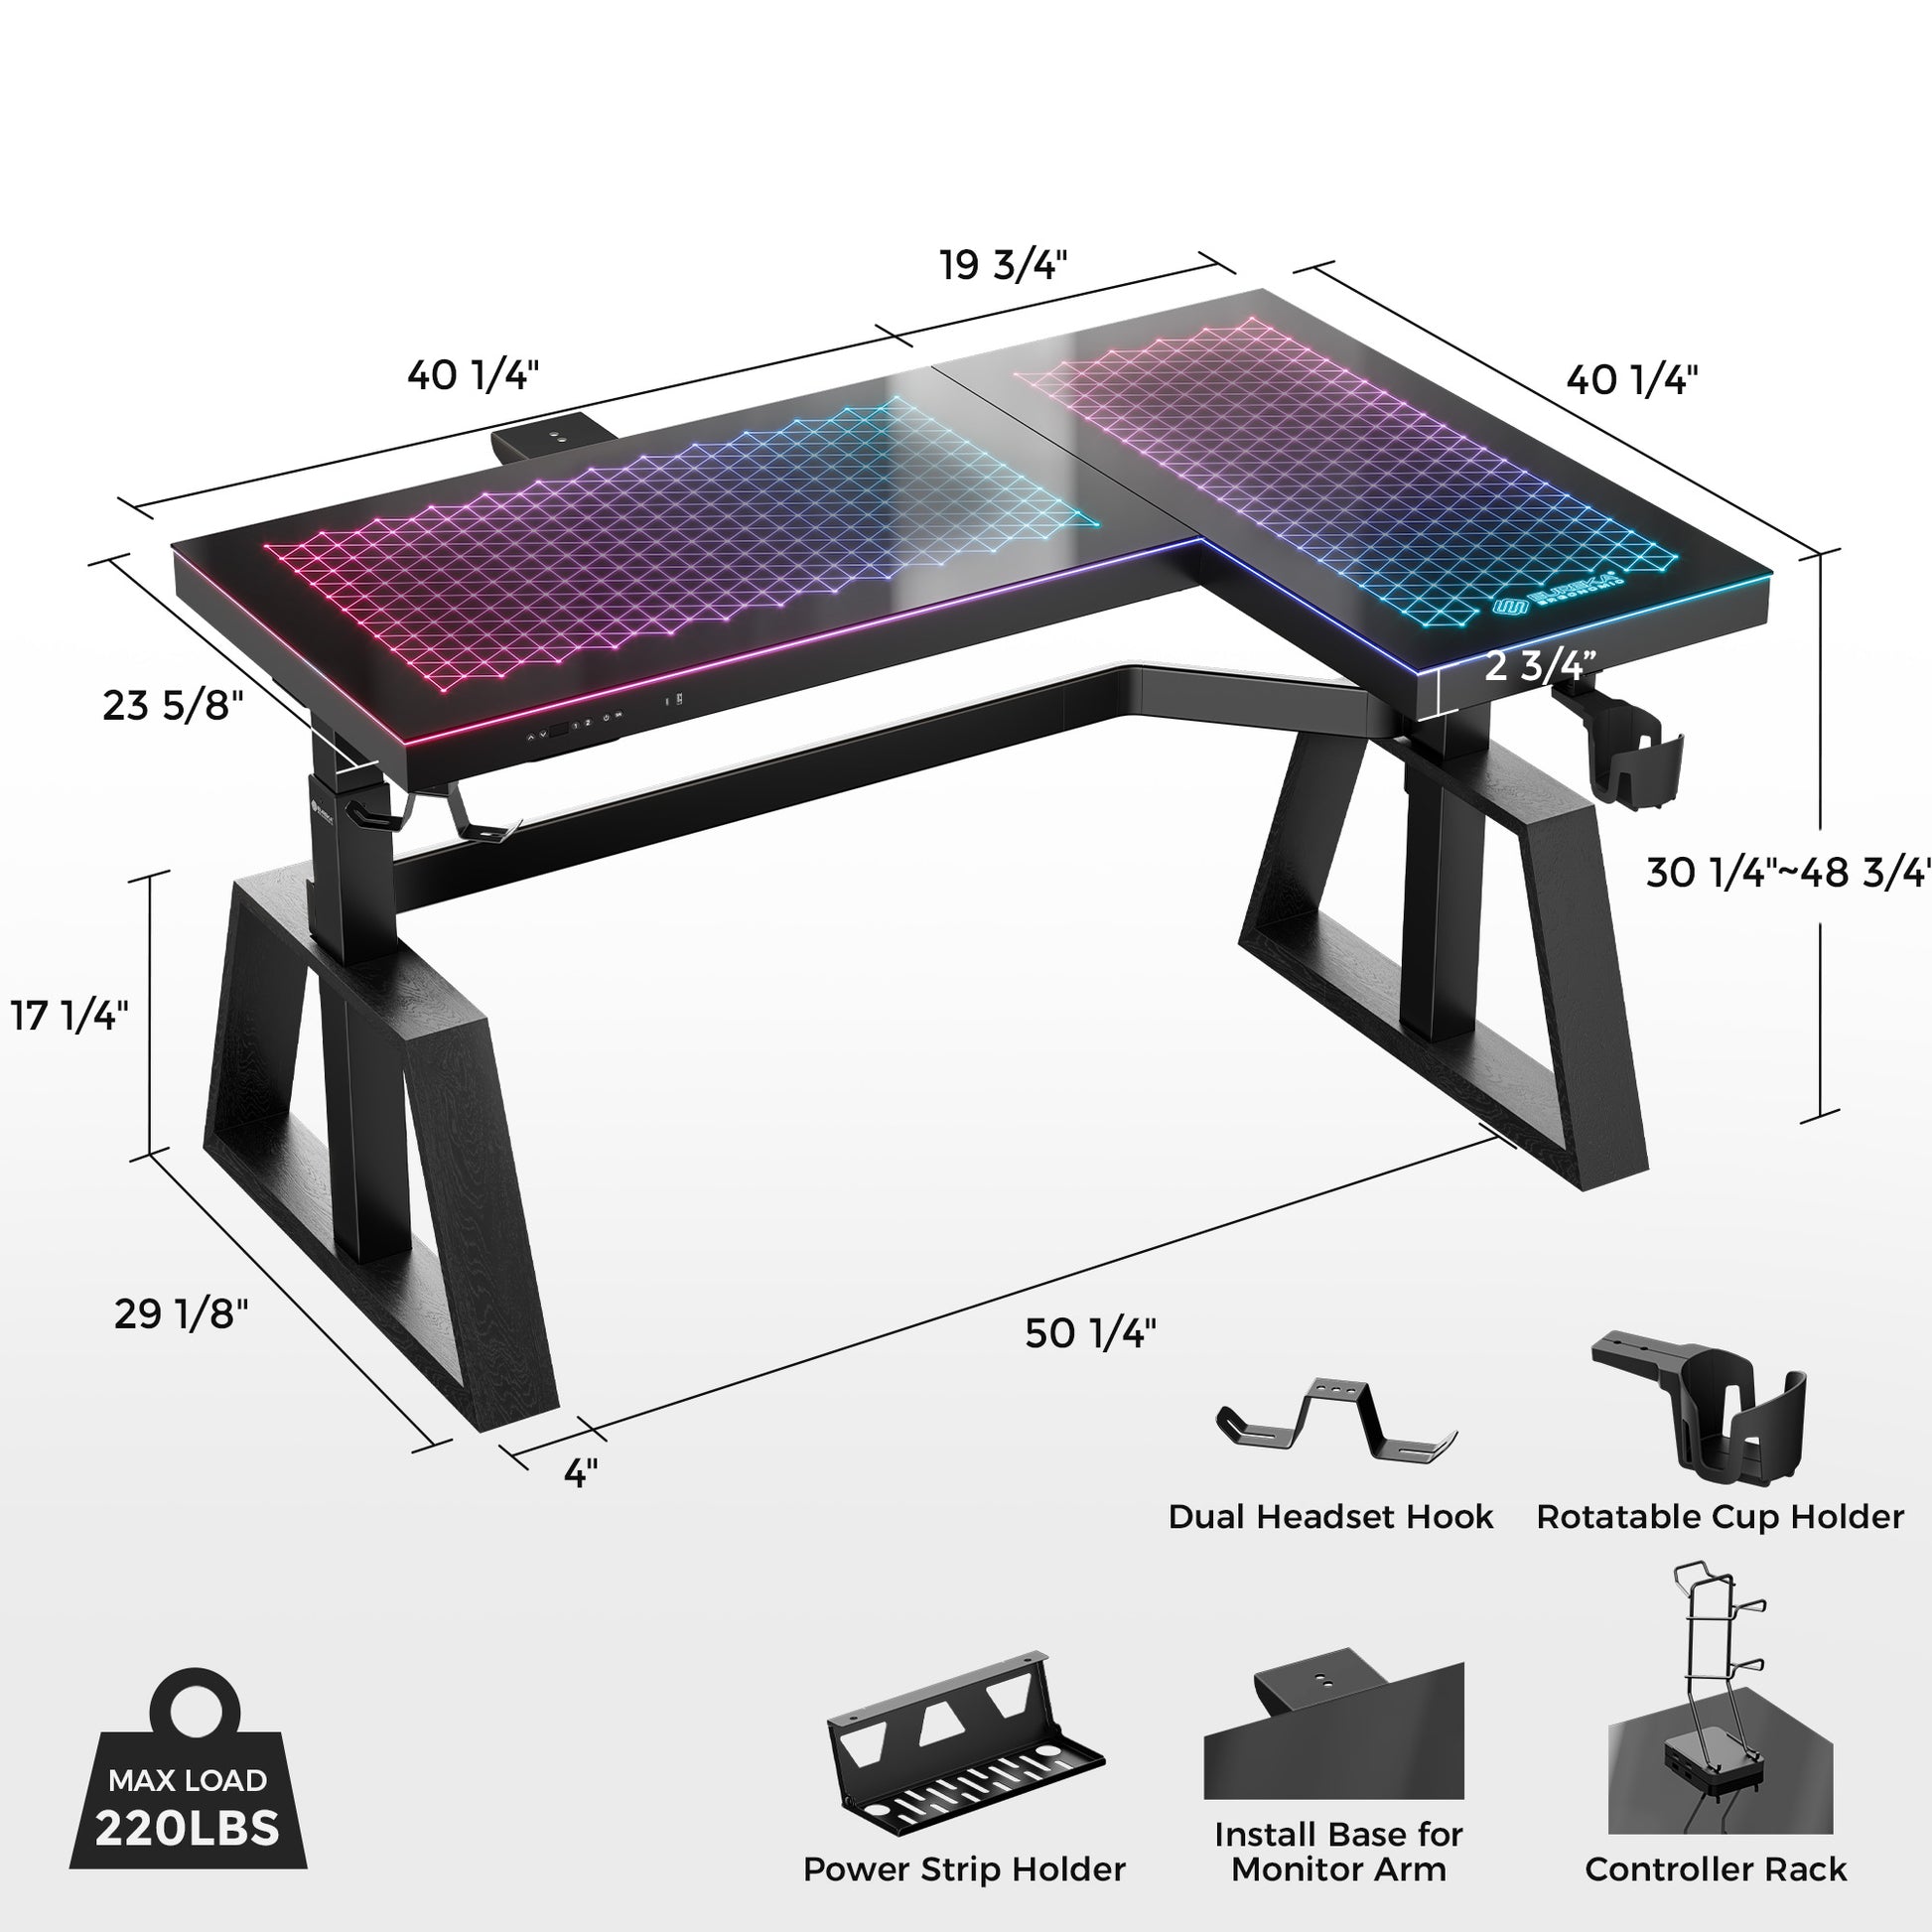 GTG-L60 PRO, L-Shaped Glass Desktop Gaming Standing Desk, Black-colored, Right Sided, RGB Light Up Gaming Desk, Glass Top, Product Dimensions